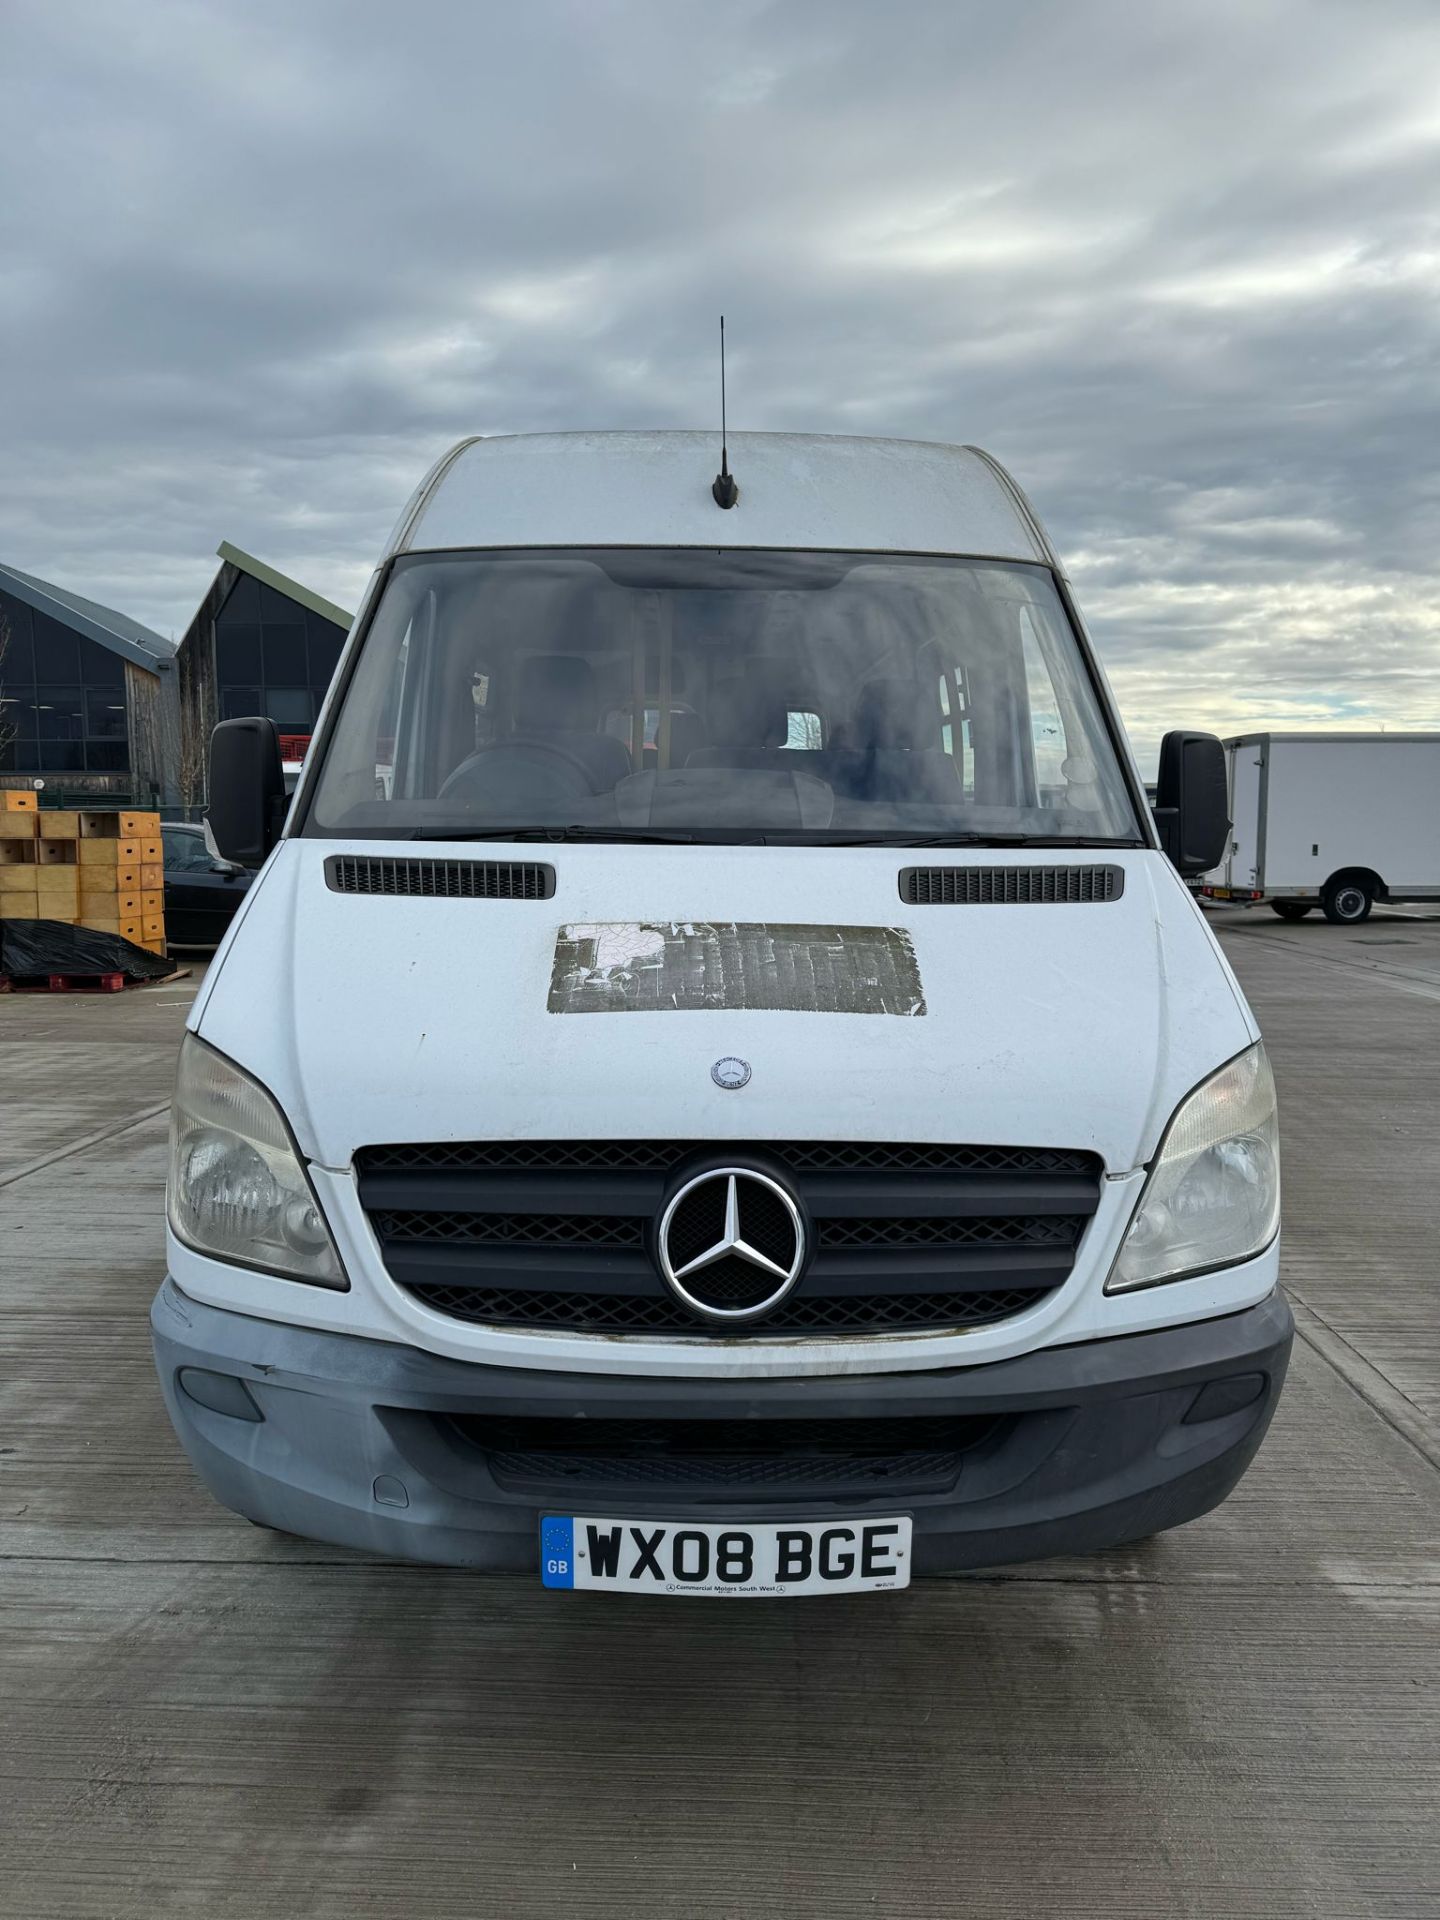 2008, MERCEDES-BENZ SPRINTER Welfare Bus (Ex-Council Owned & Maintained) - Image 8 of 30